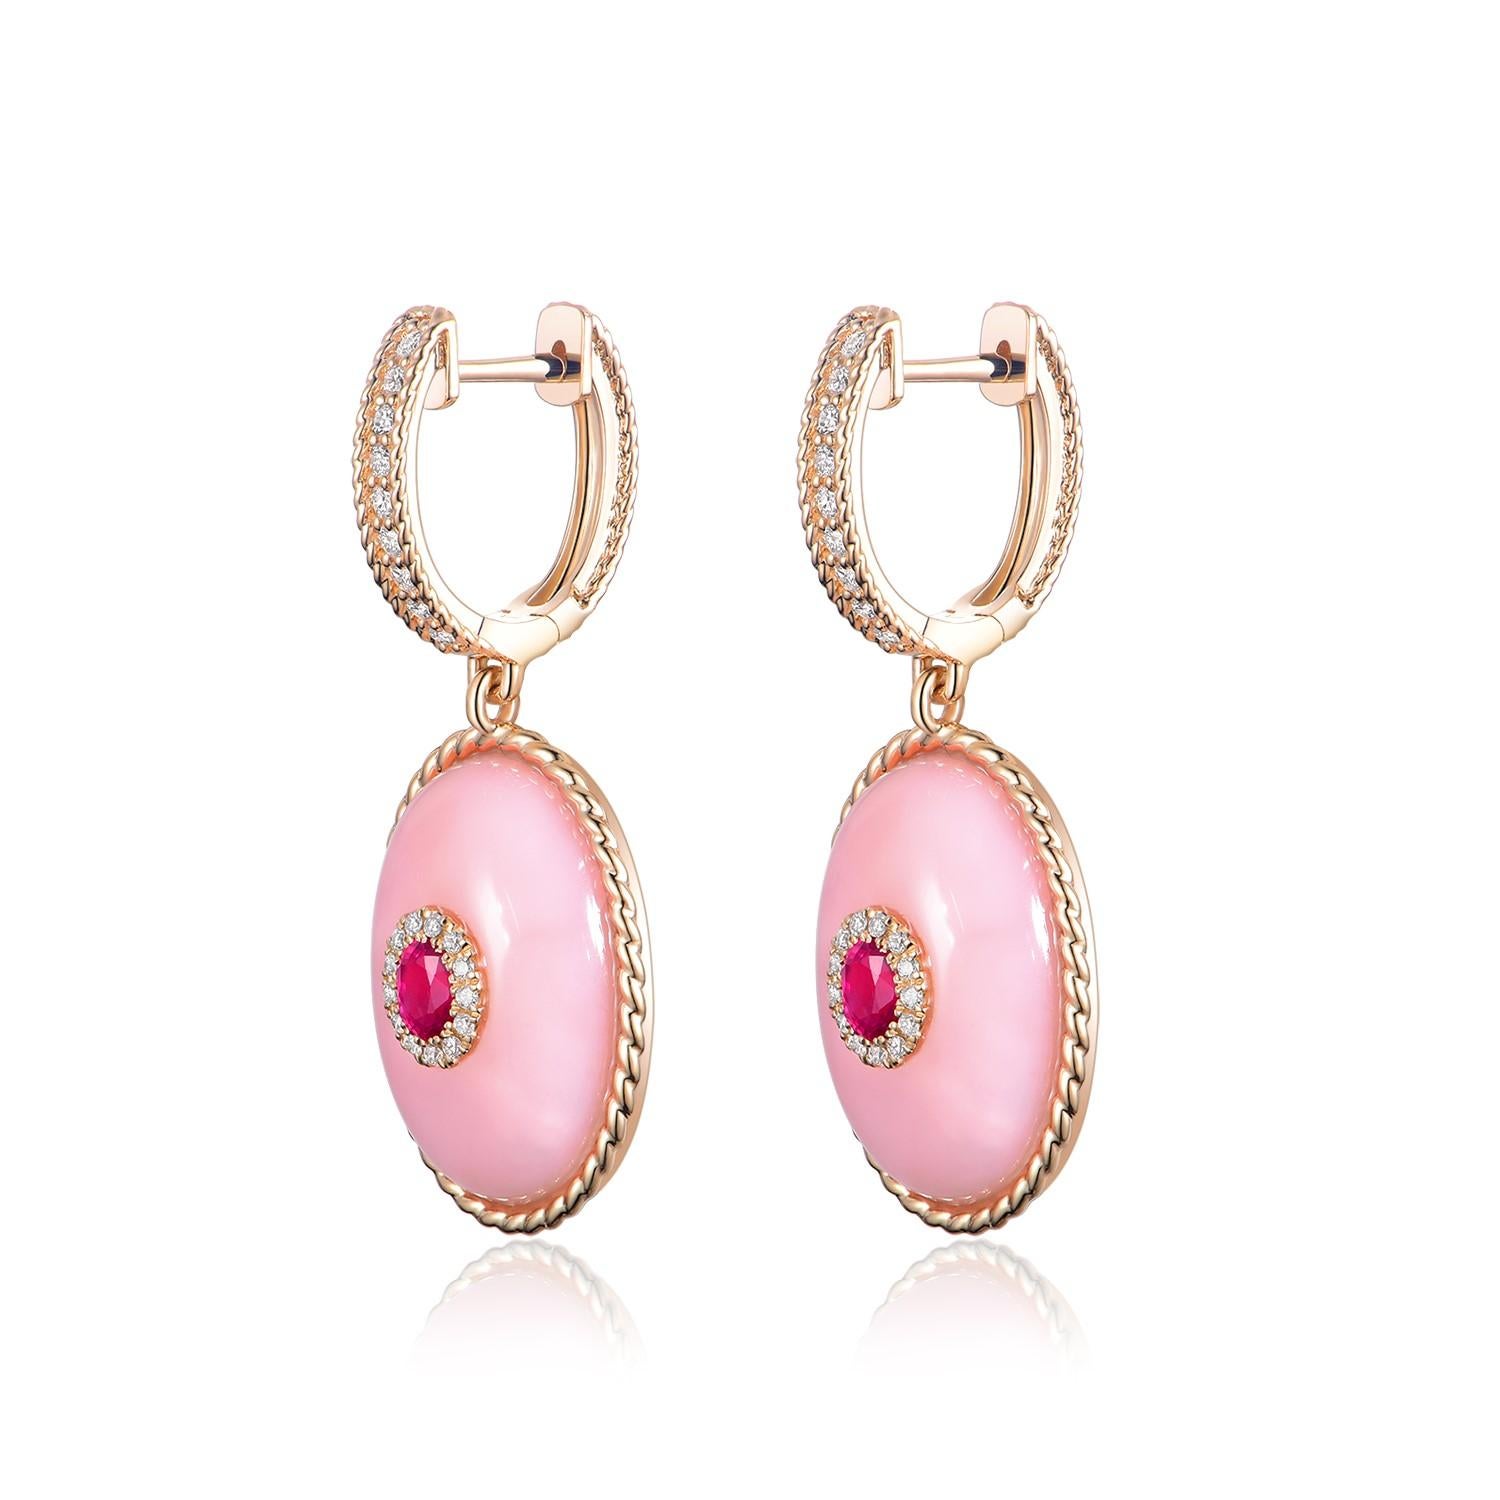 Embrace the allure of vibrancy and luxury with our Pink Opal Ruby Dangle Earrings set in 14 Karat Yellow Gold. These earrings boast an enchanting centerpiece of two oval-shaped Pink Opals, weighing an impressive 16.644 carats, each nestled in